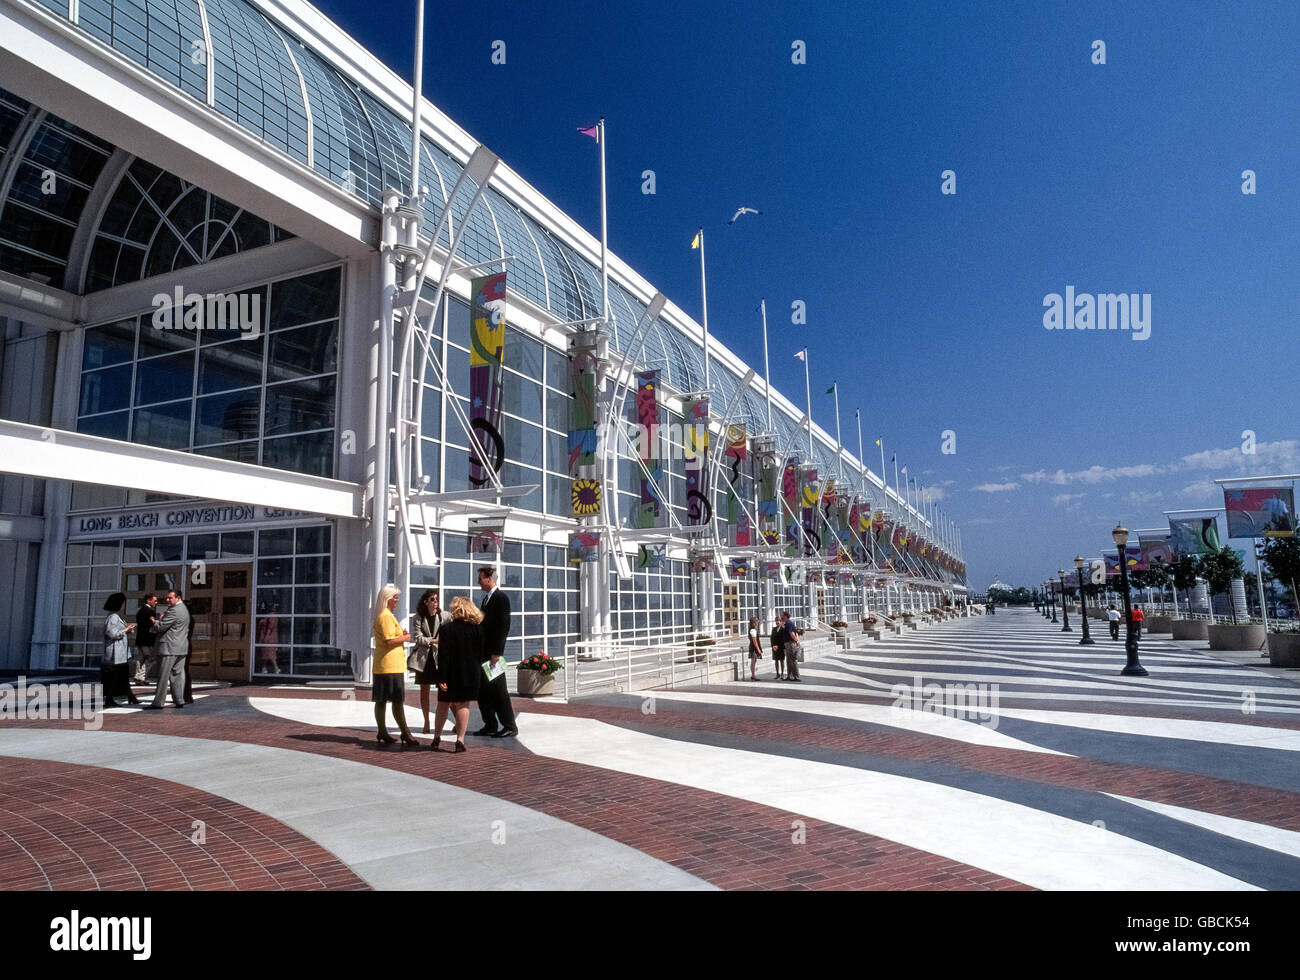 A wide outdoor promenade stretches in front of the glass facade that lets plenty of sunshine into the Long Beach Convention Center located along the downtown waterfront of Long Beach, California, USA. The impressive building holds exhibition halls and meeting rooms that are part of a convention and entertainment complex that also includes two theaters and an arena for concerts and sporting events. Stock Photo